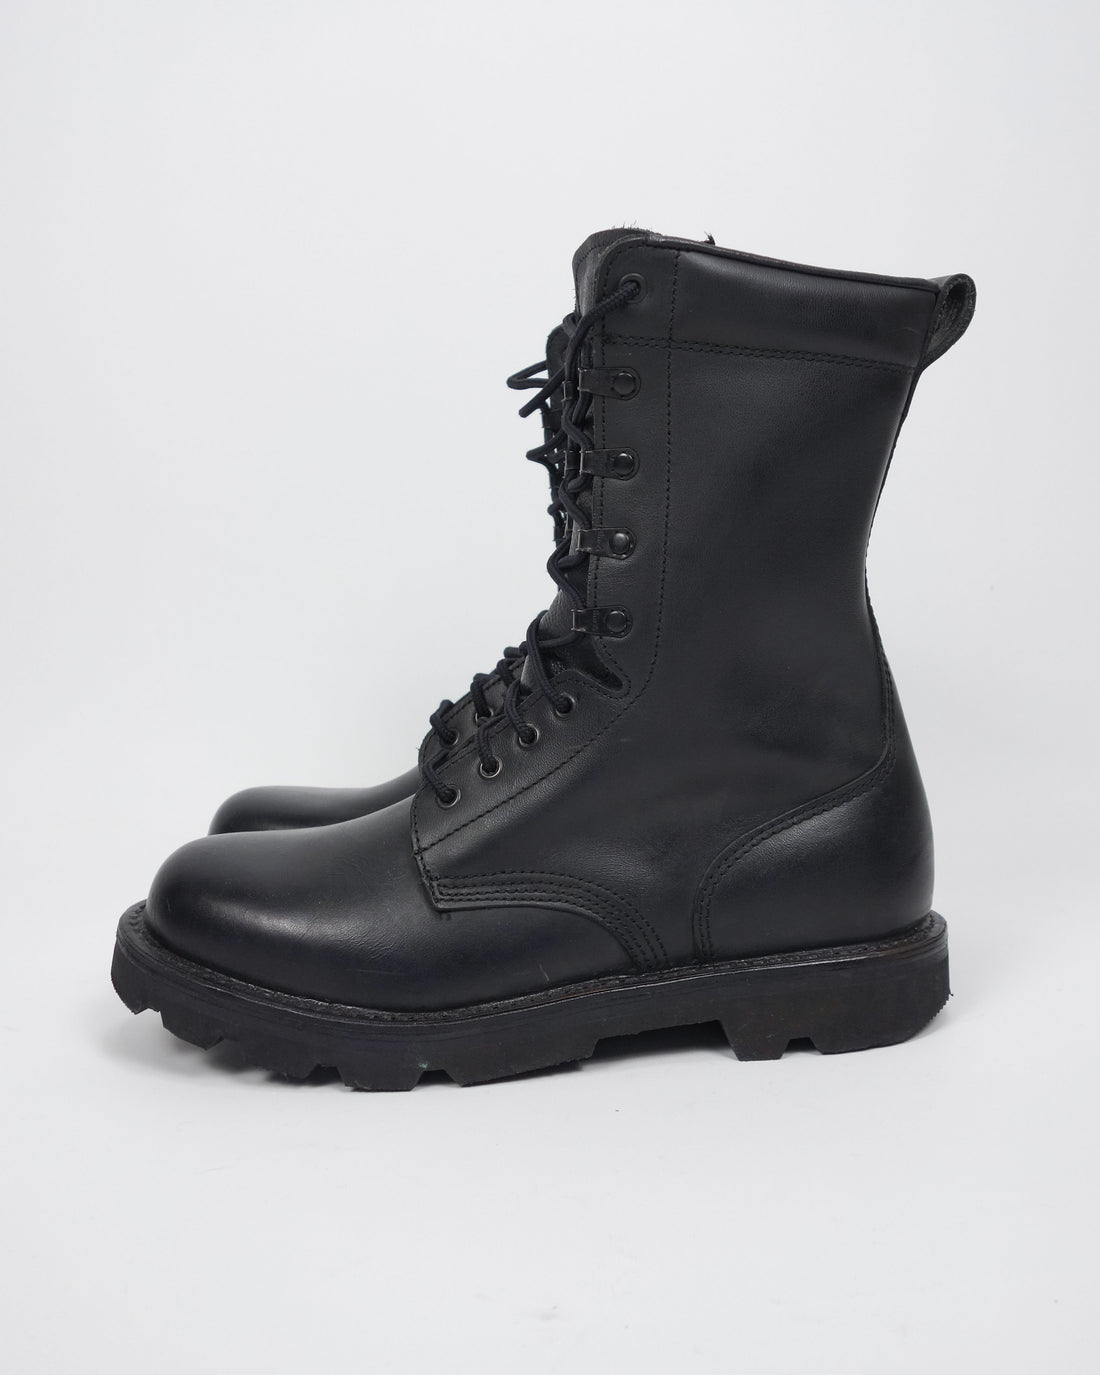 Military Leather Black Combat Boots 1990's